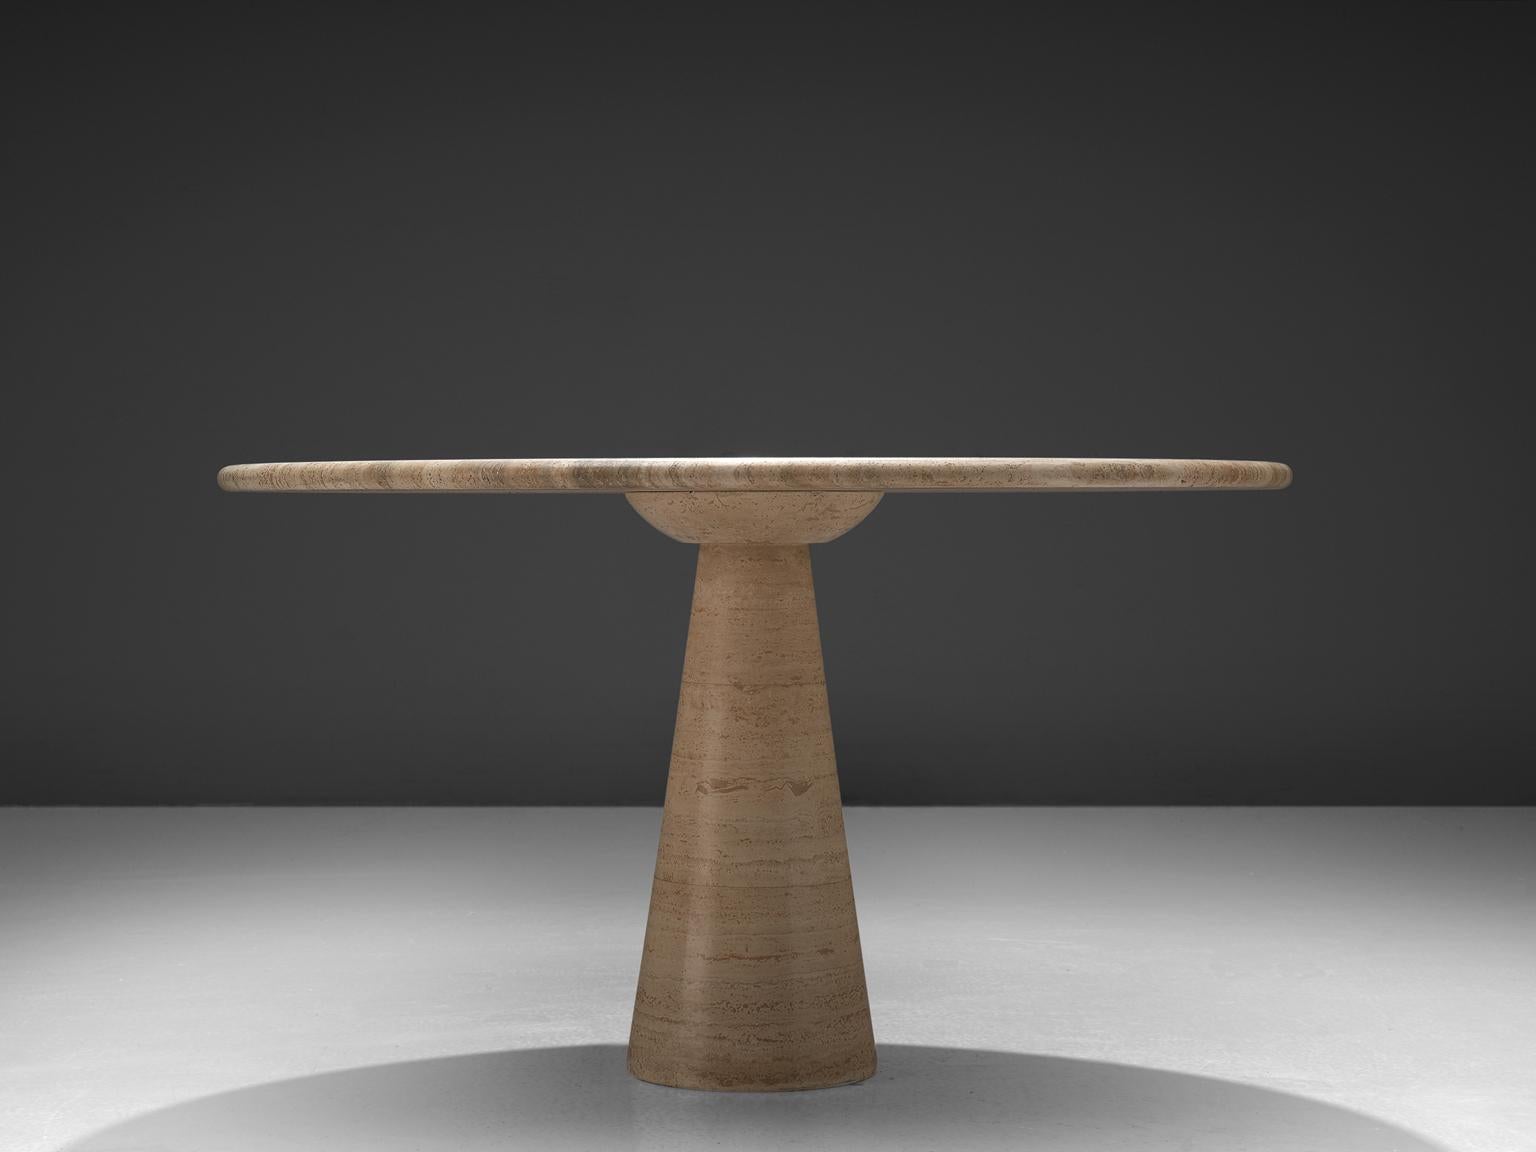 Centre table, travertine, Europe, 1970s.

This strong dining table features a colon, cone shaped foot and a thick circular travertine tabletop. The aesthetics are archetypical for postmodern design, bearing references to architectural forms and